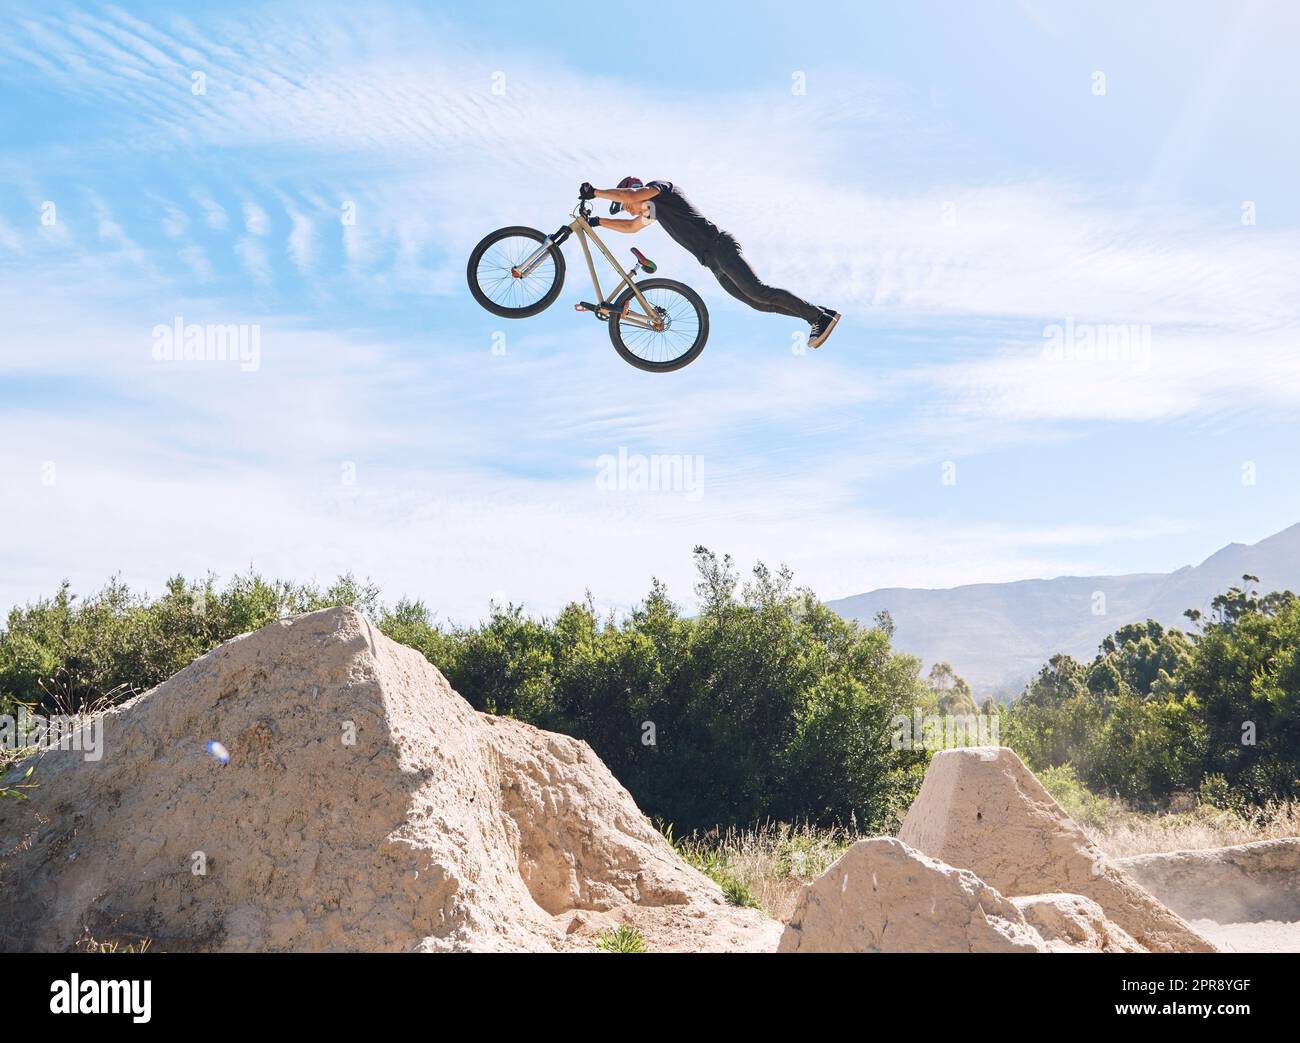 Young man showing his cycling skills while out cycling on a bicycle outside. Adrenaline junkie practicing a dirt jump outdoors. Male wearing a helmet doing extreme sports with a mountain bike Stock Photo